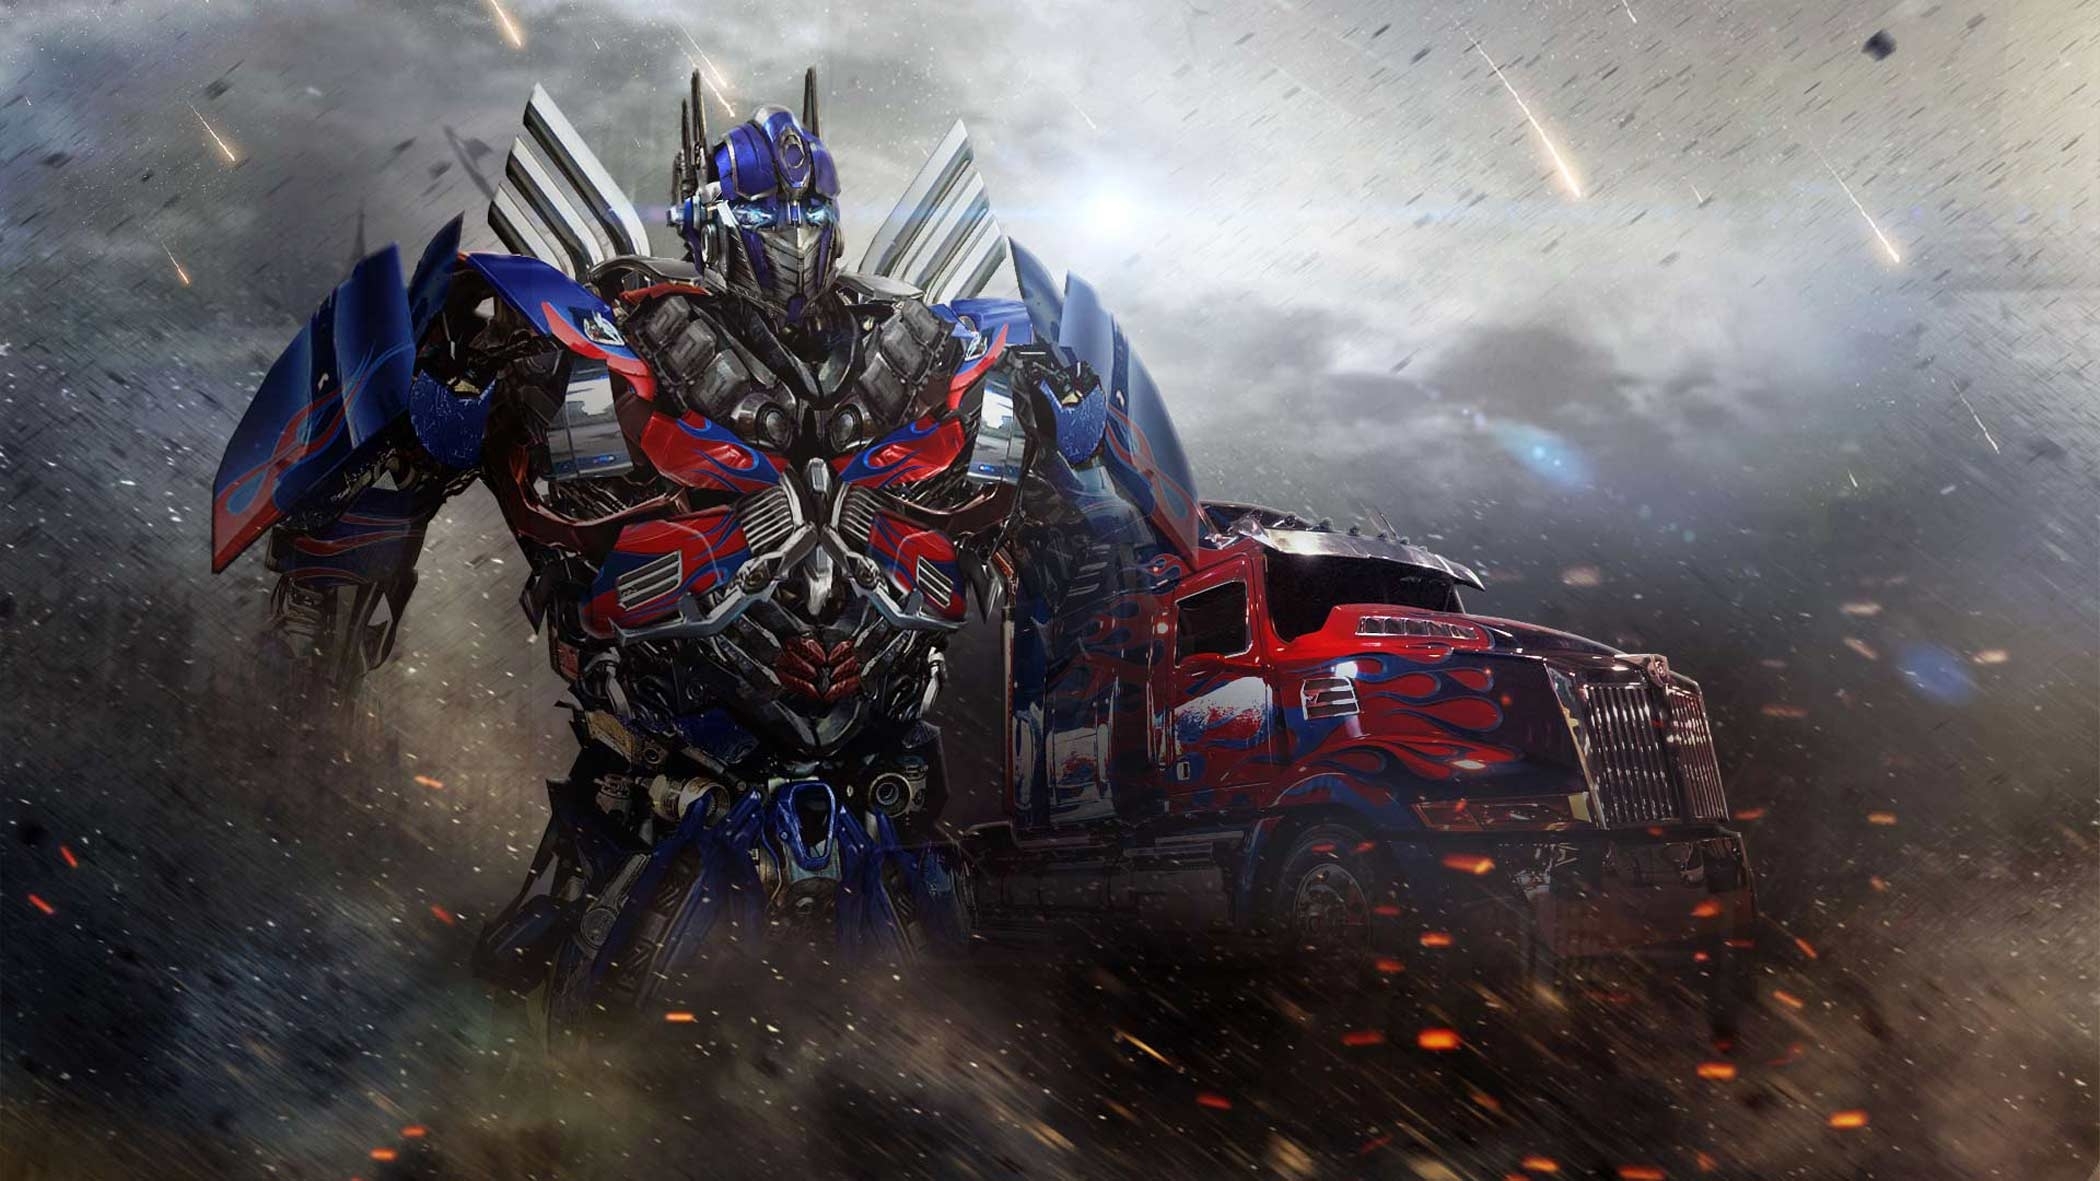 10 Most Popular Transformers Wallpaper Hd 1080P FULL HD 1080p For PC Background